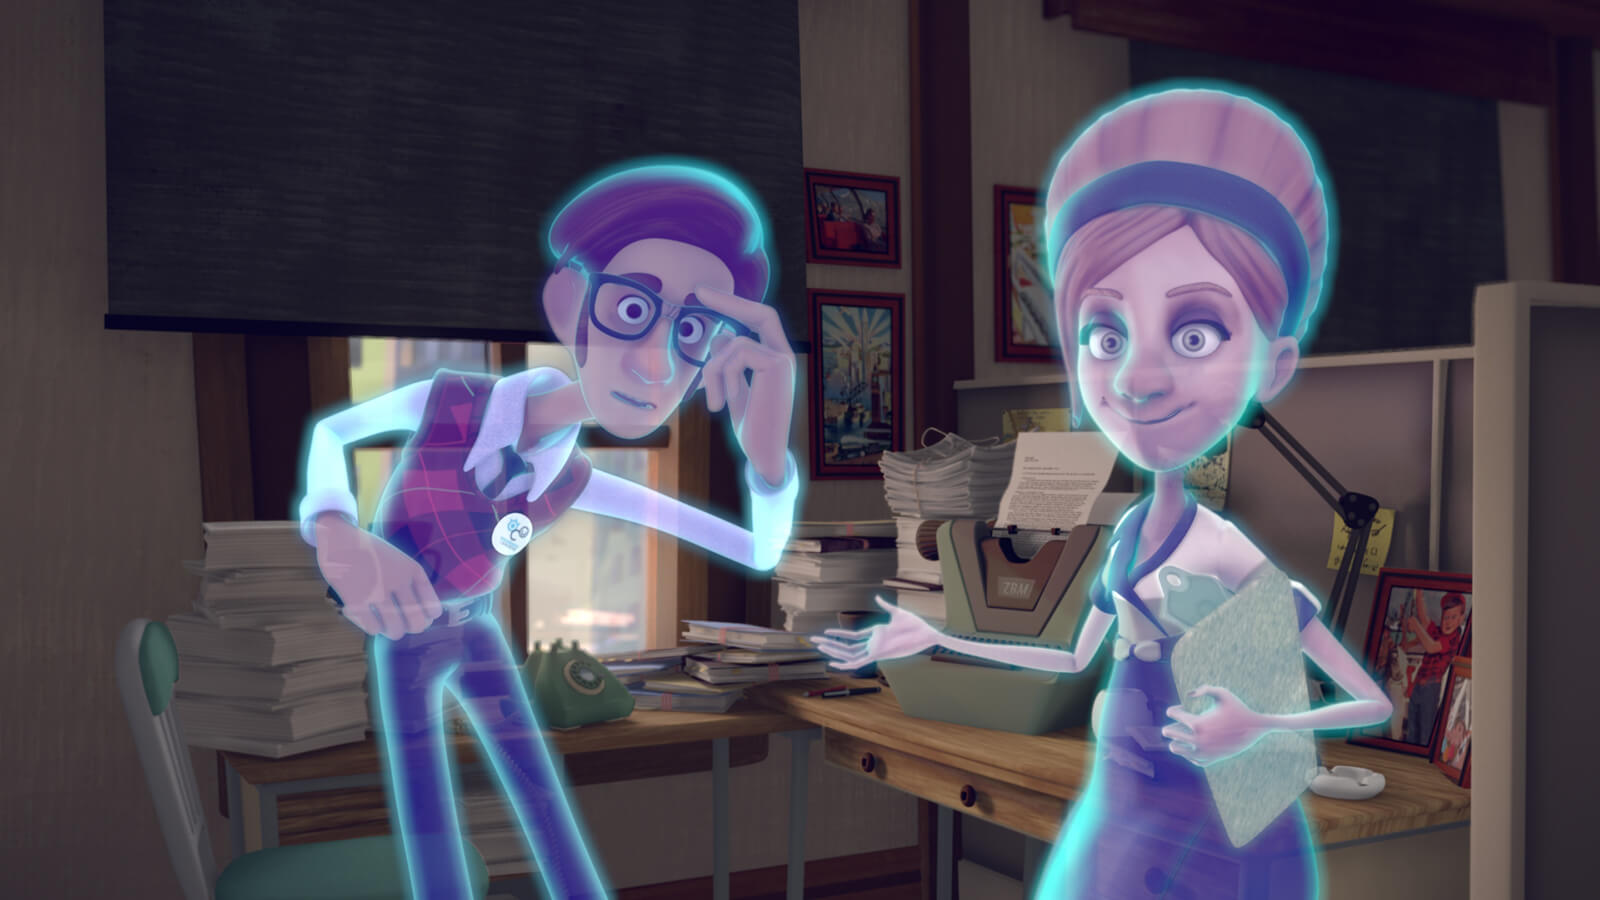 A translucent, glowing blue man and another spectral woman holding a clipboard stare directly at the viewer.